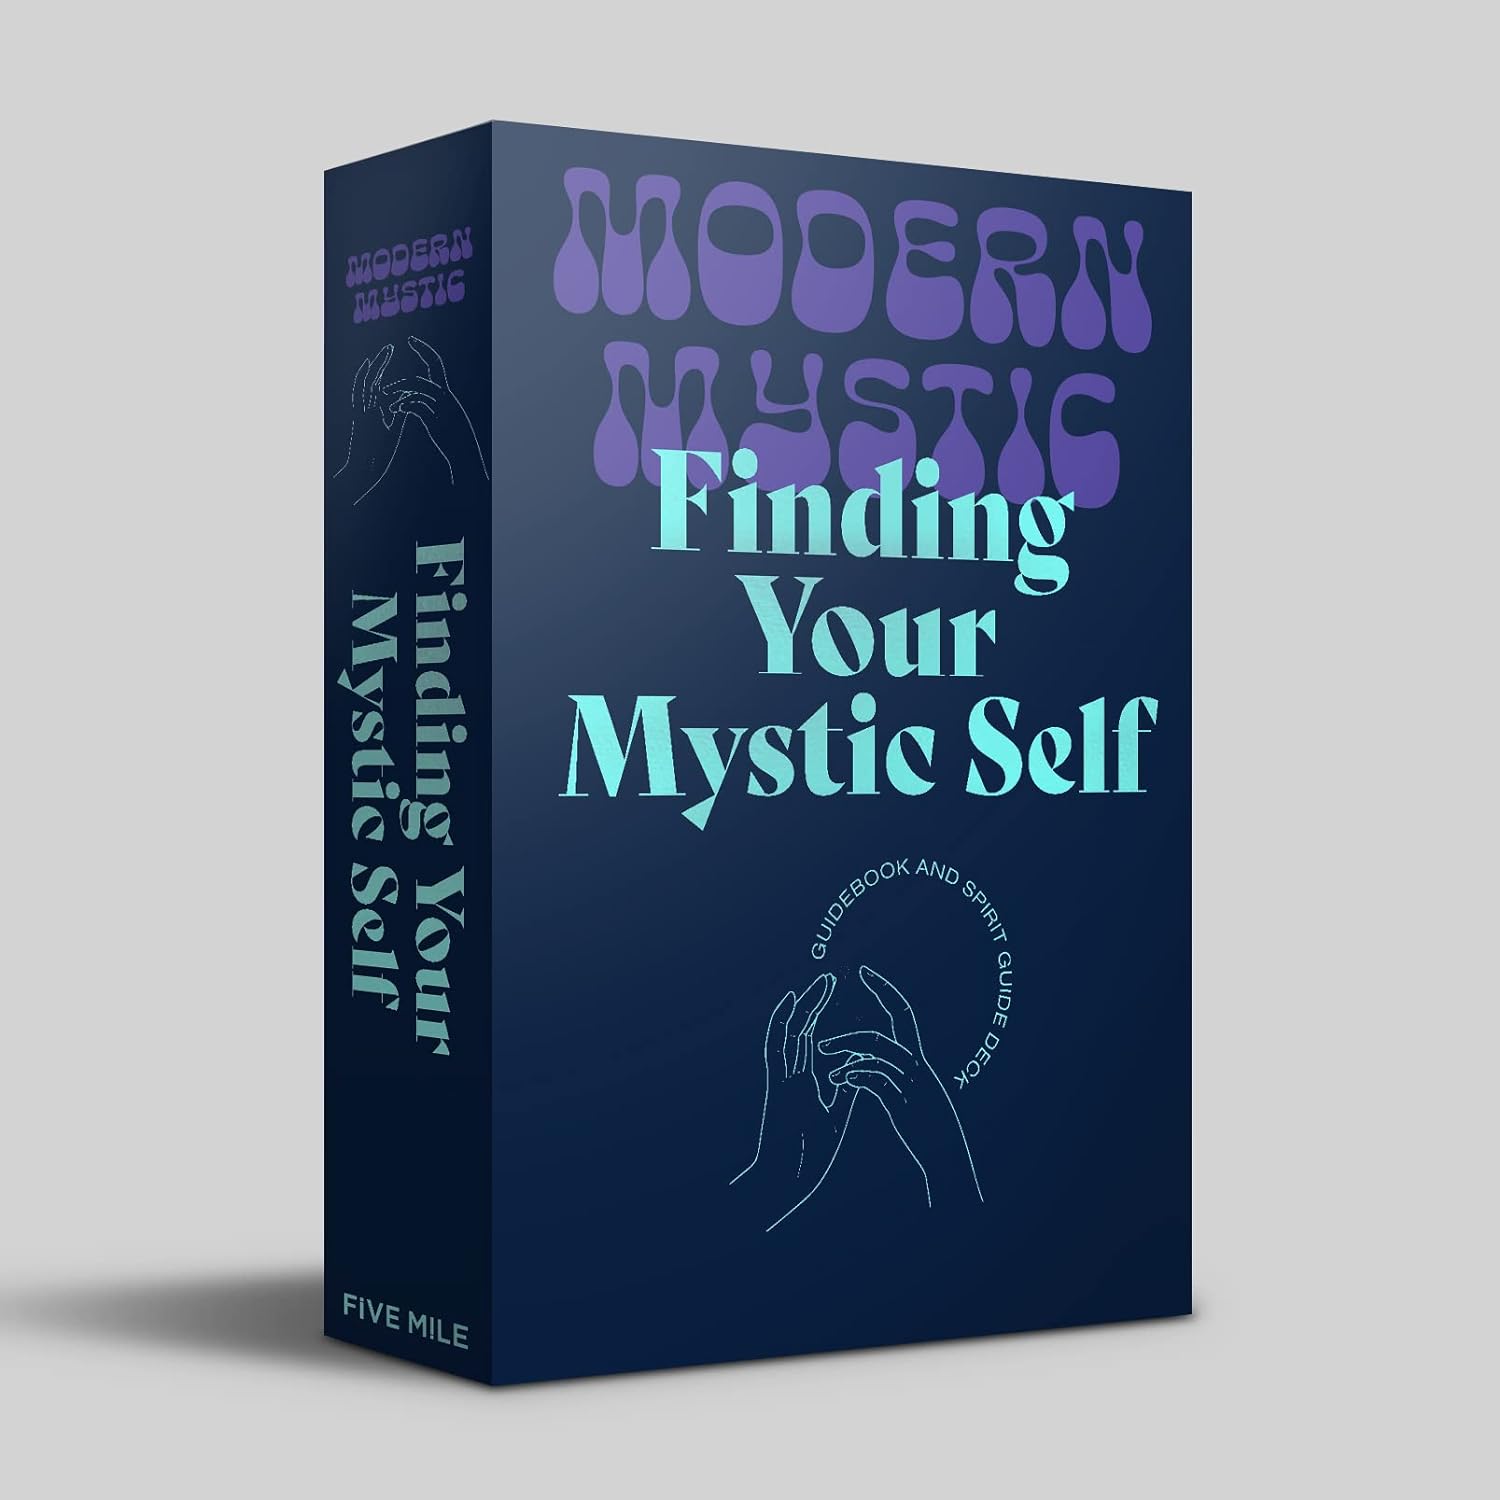 PRELOVED Modern Mystic: Finding Your Mystic Self